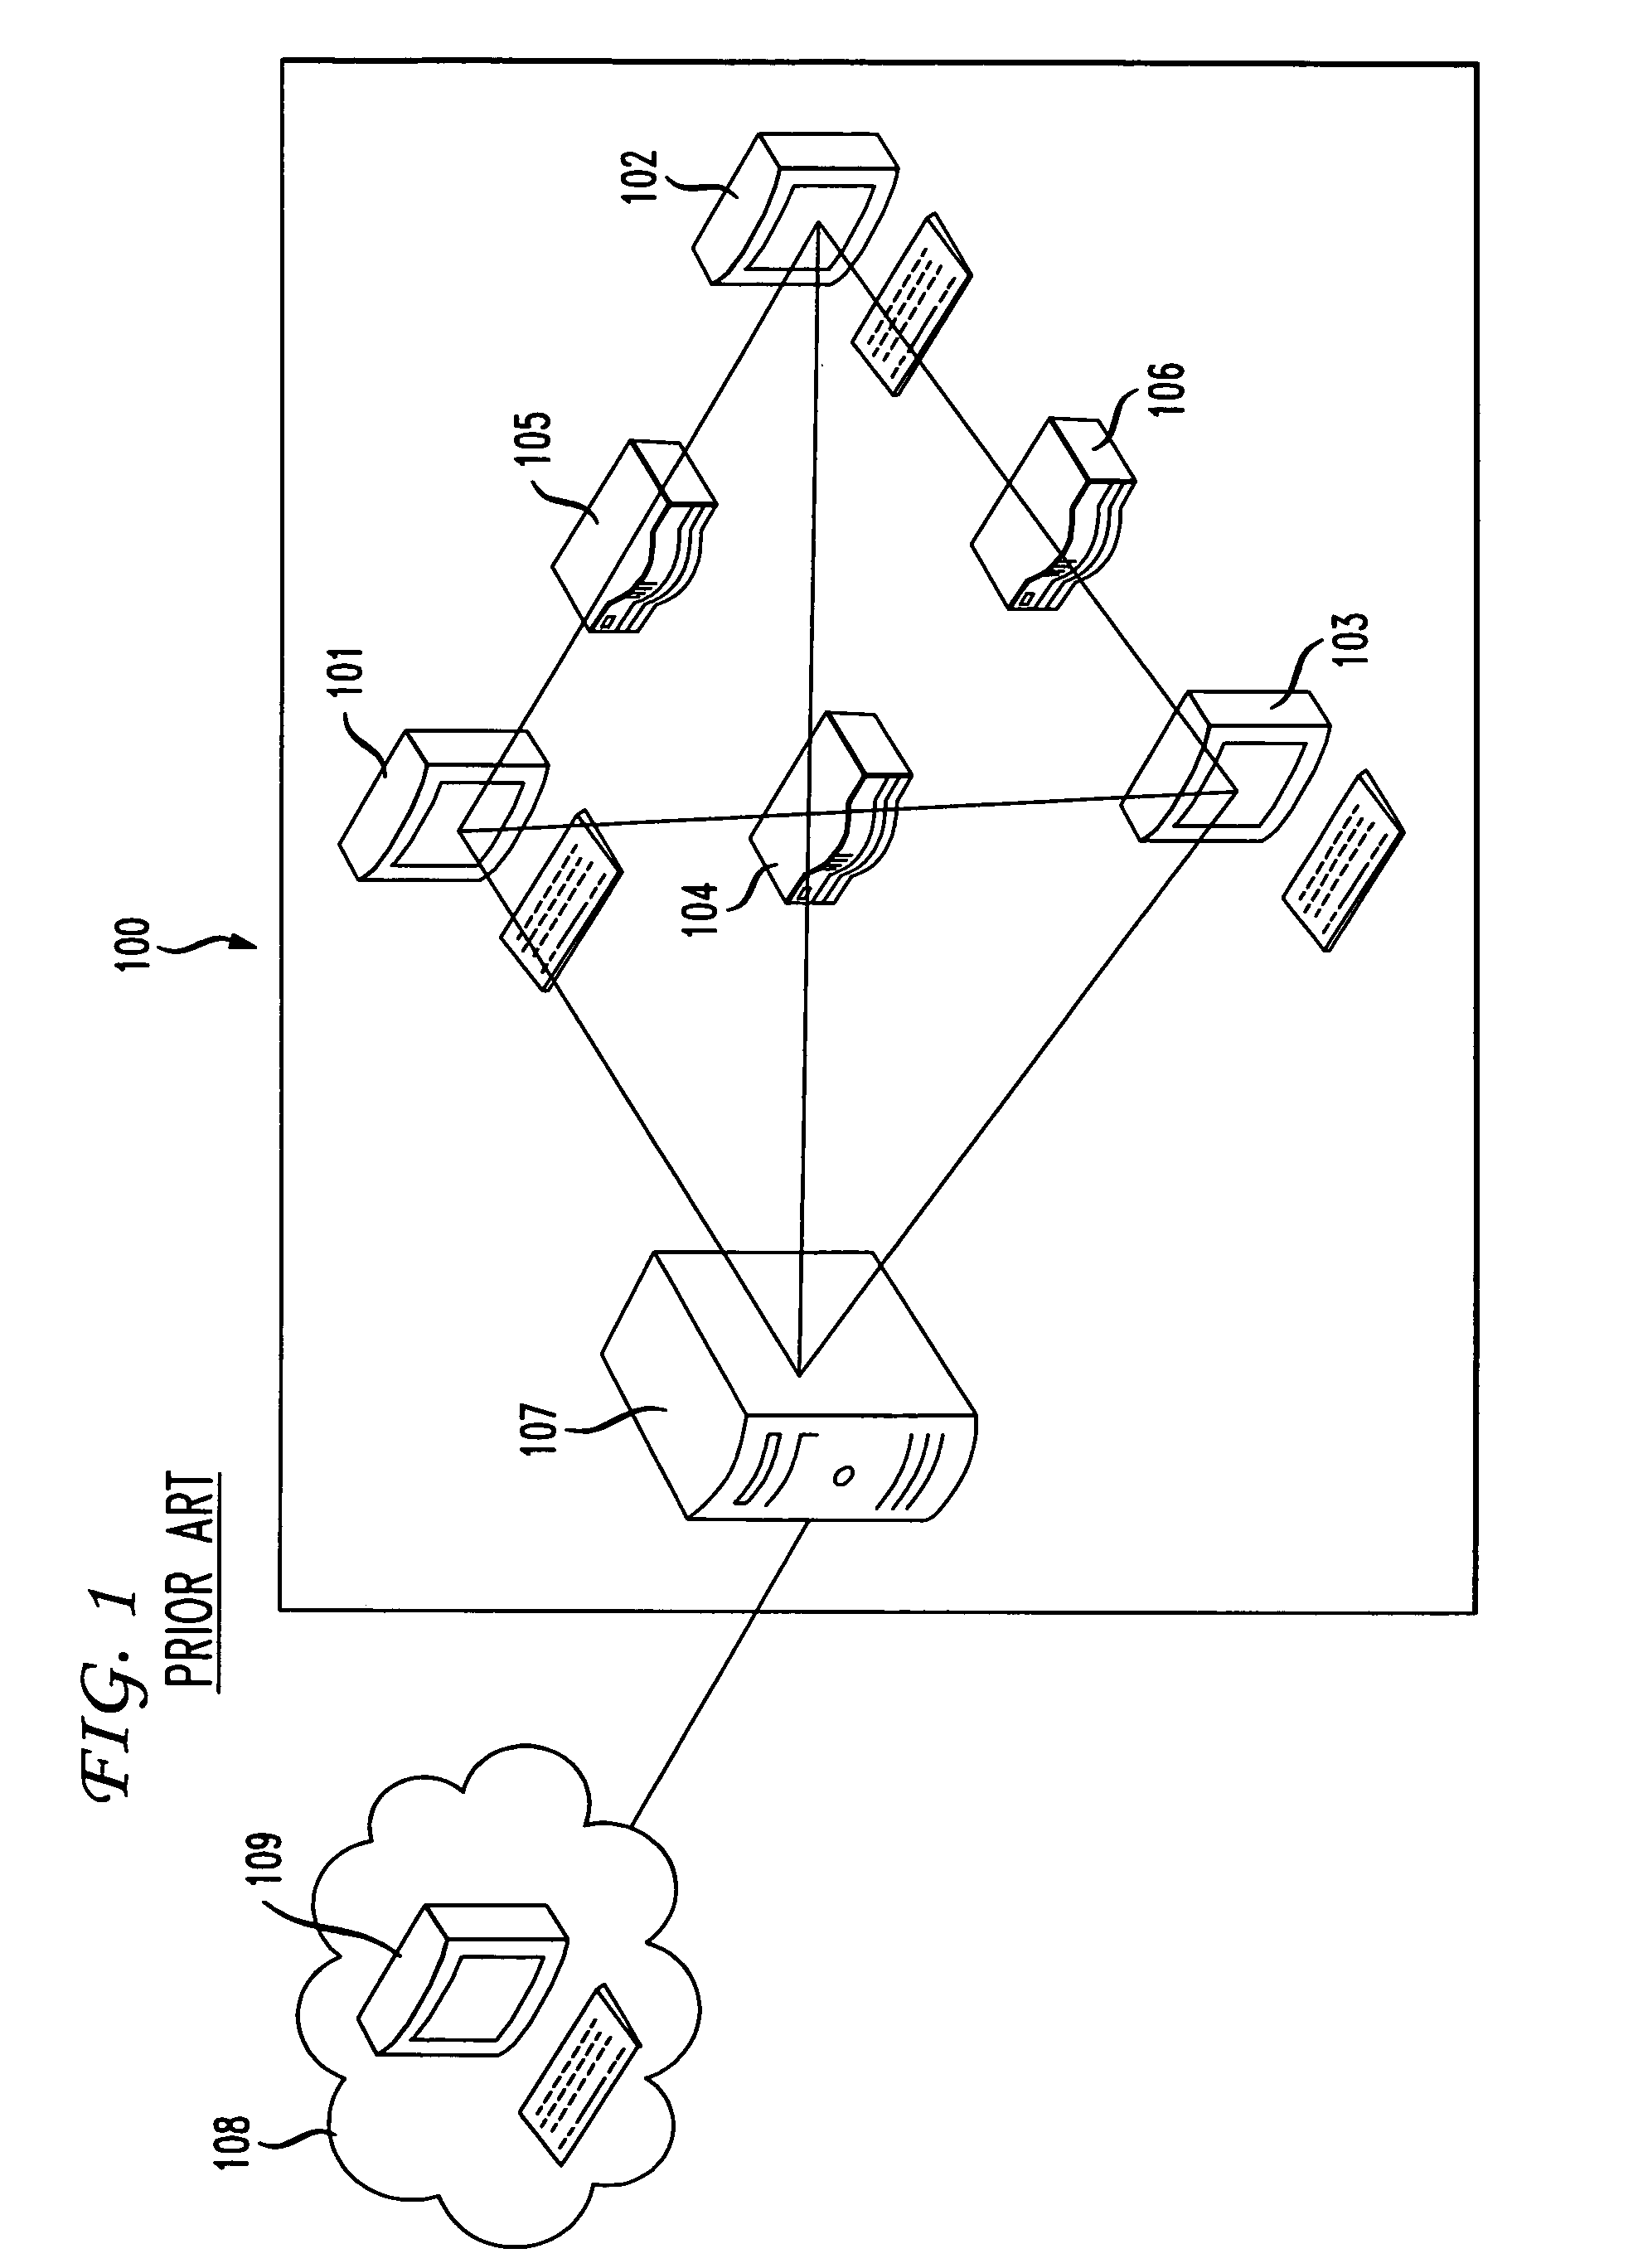 Method and apparatus for integrated network security alert information retrieval